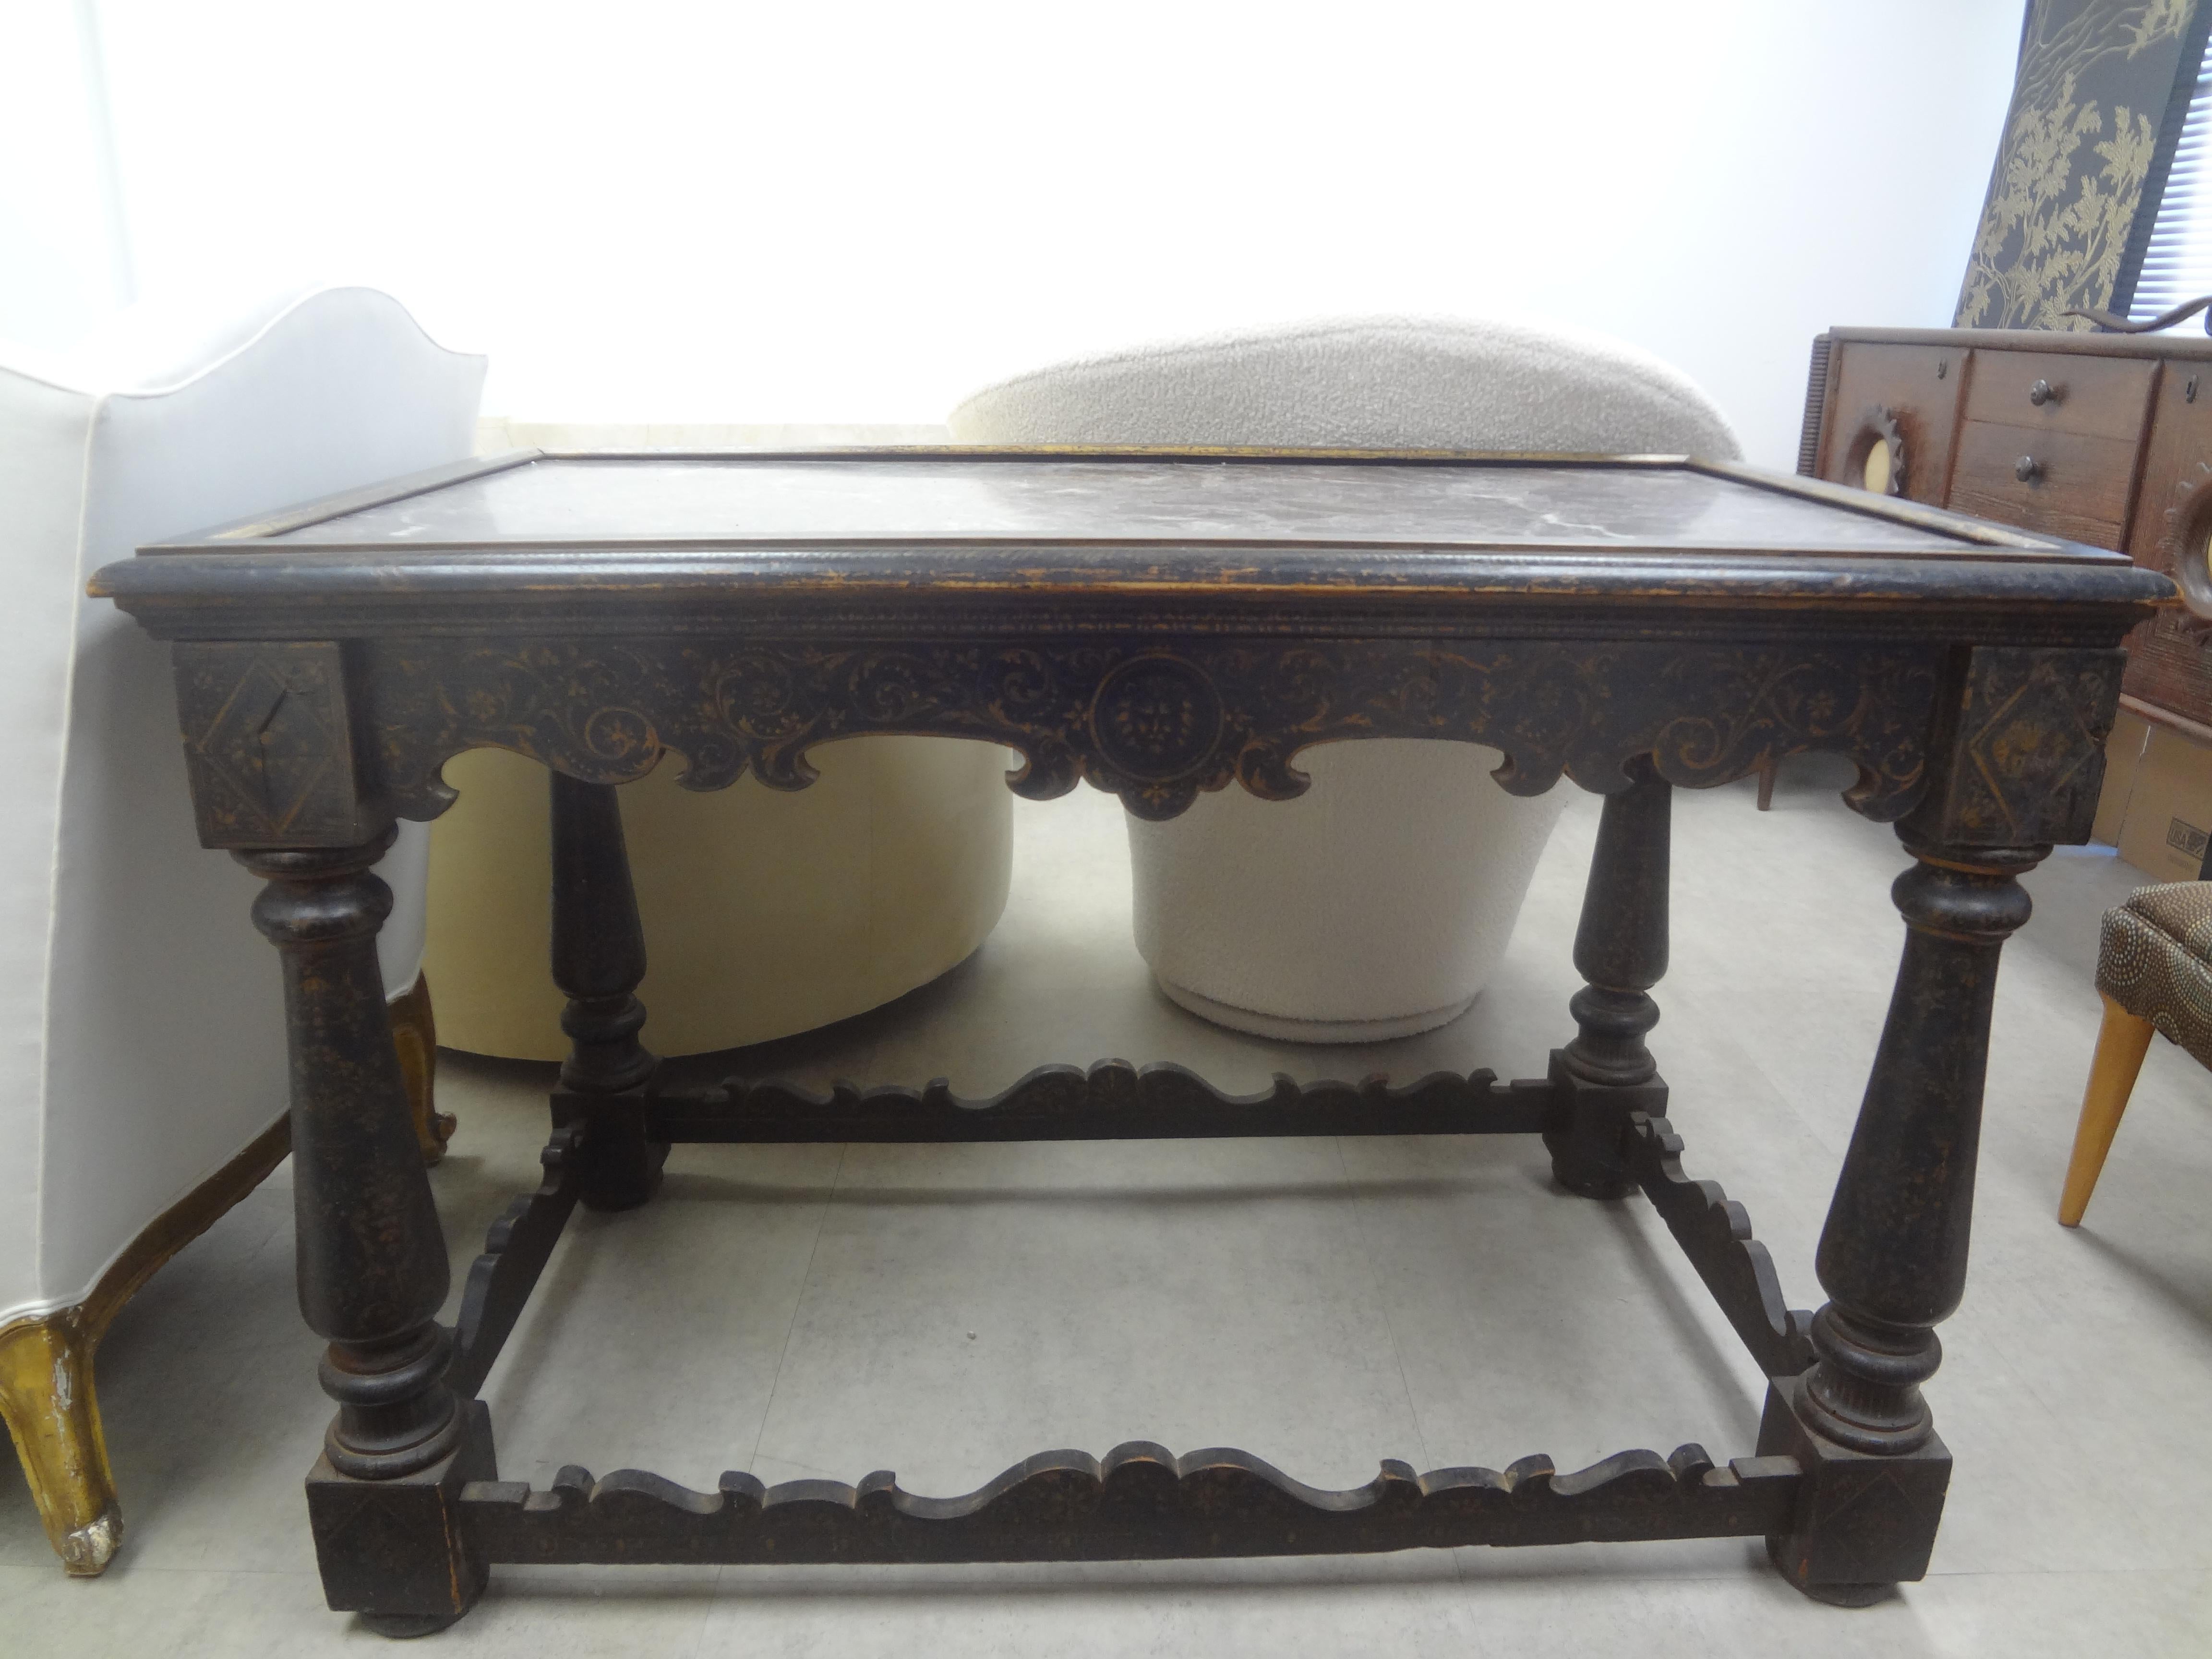 18th Century Italian Louis XIV Ebonized Center Table.
Our handsome rectangular period 18th century Tuscan ebonized fruitwood table, side table or center table has turned legs, a beautifully carved hand decorated apron and stretcher with an unusual